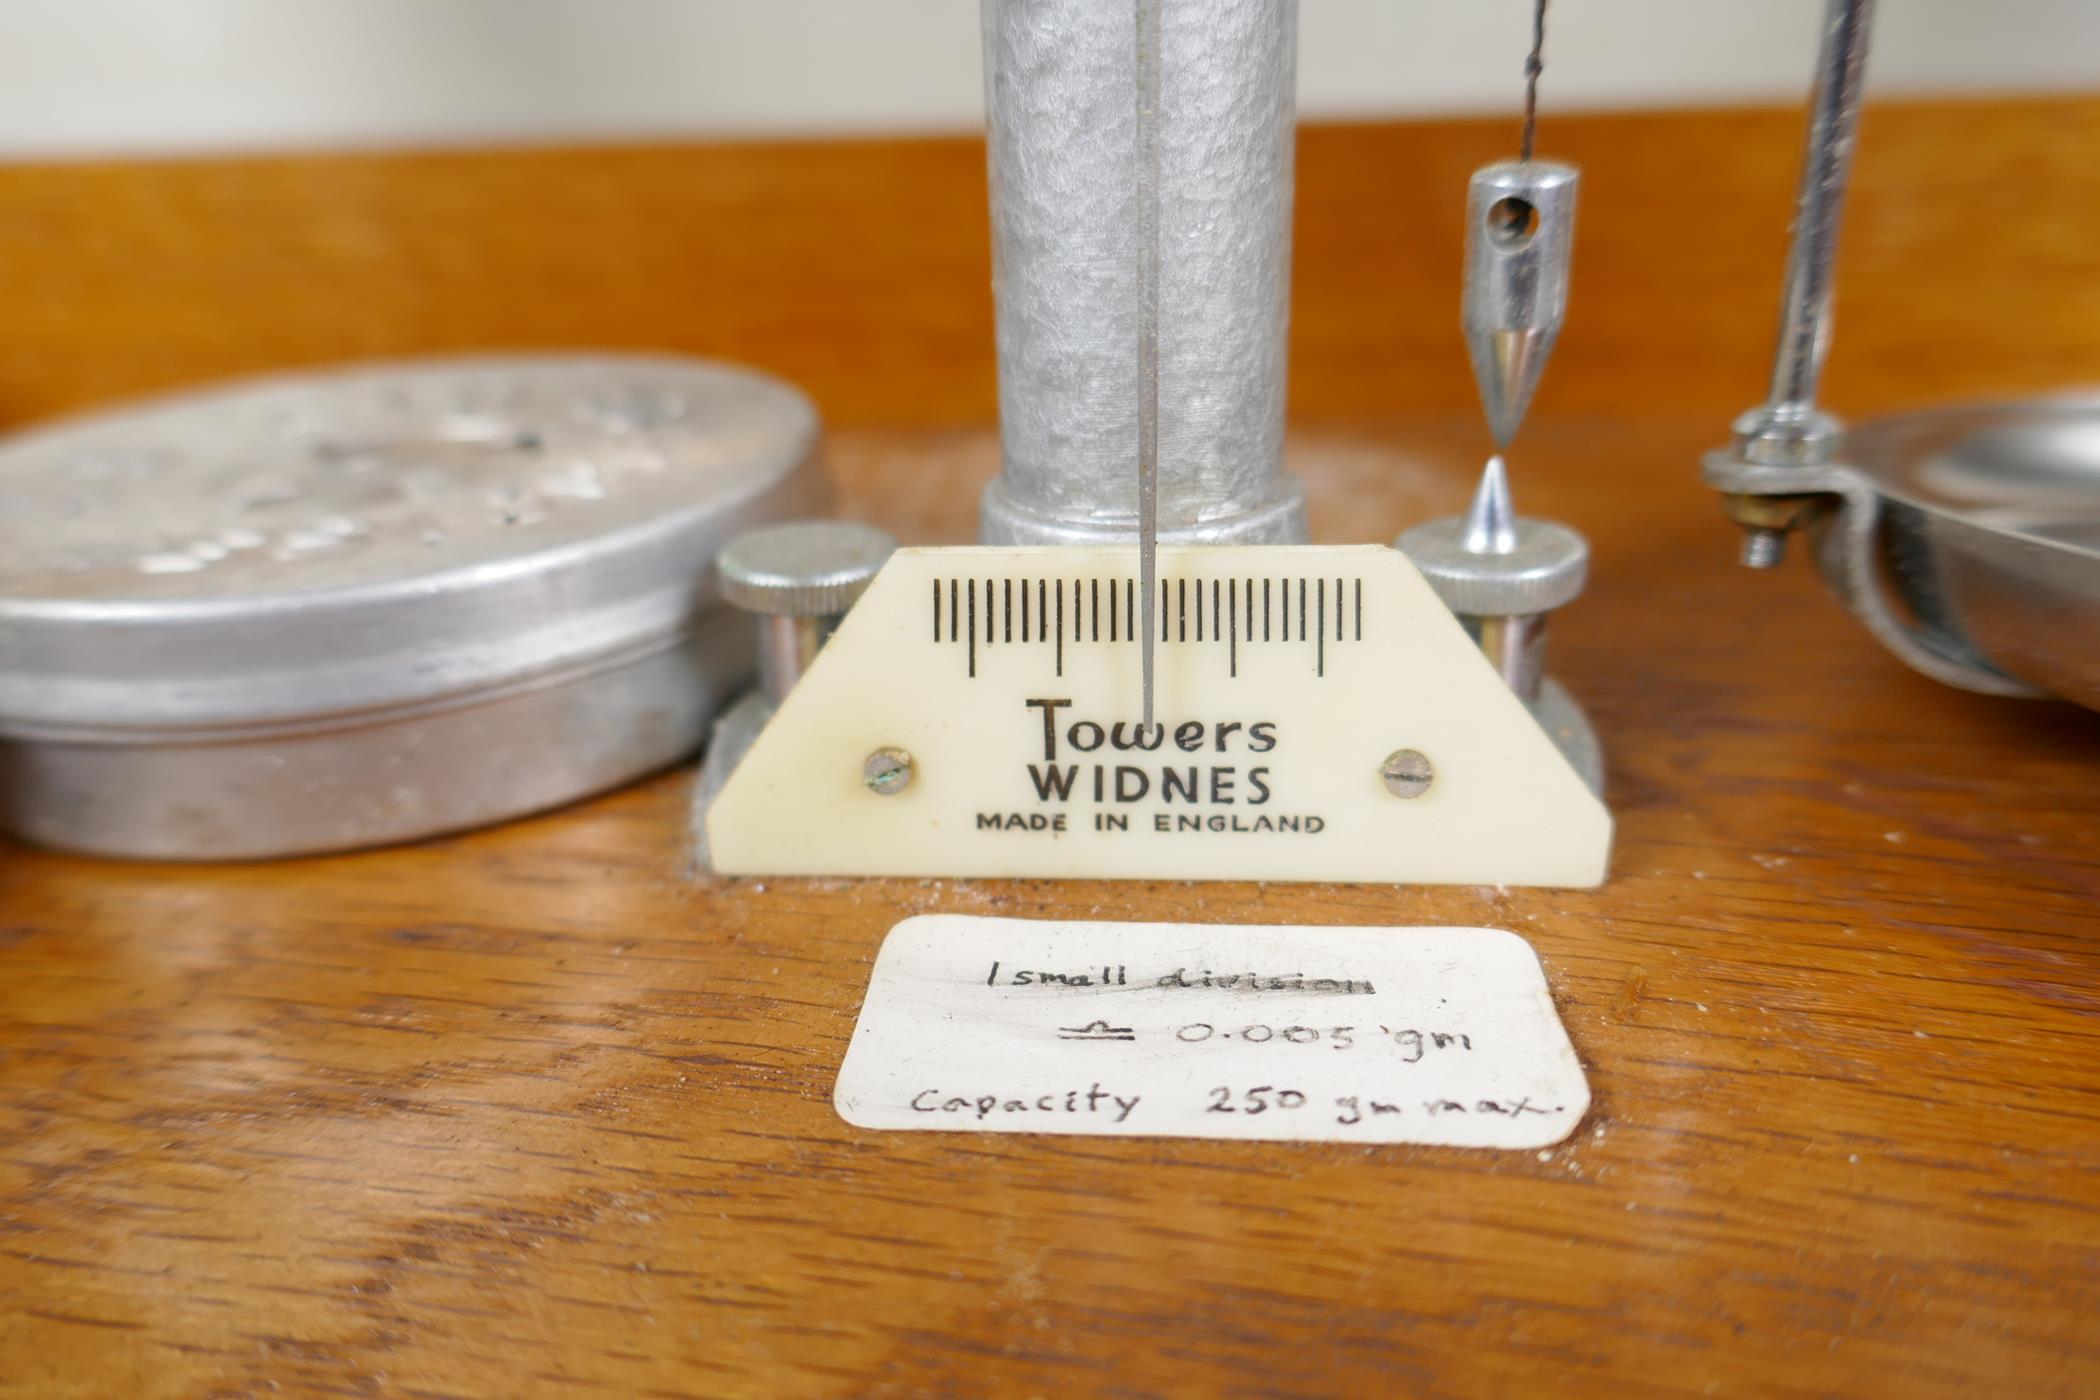 A good set of chemist's scales and weights by Towers of Widnes, together with a cased set of - Image 4 of 5